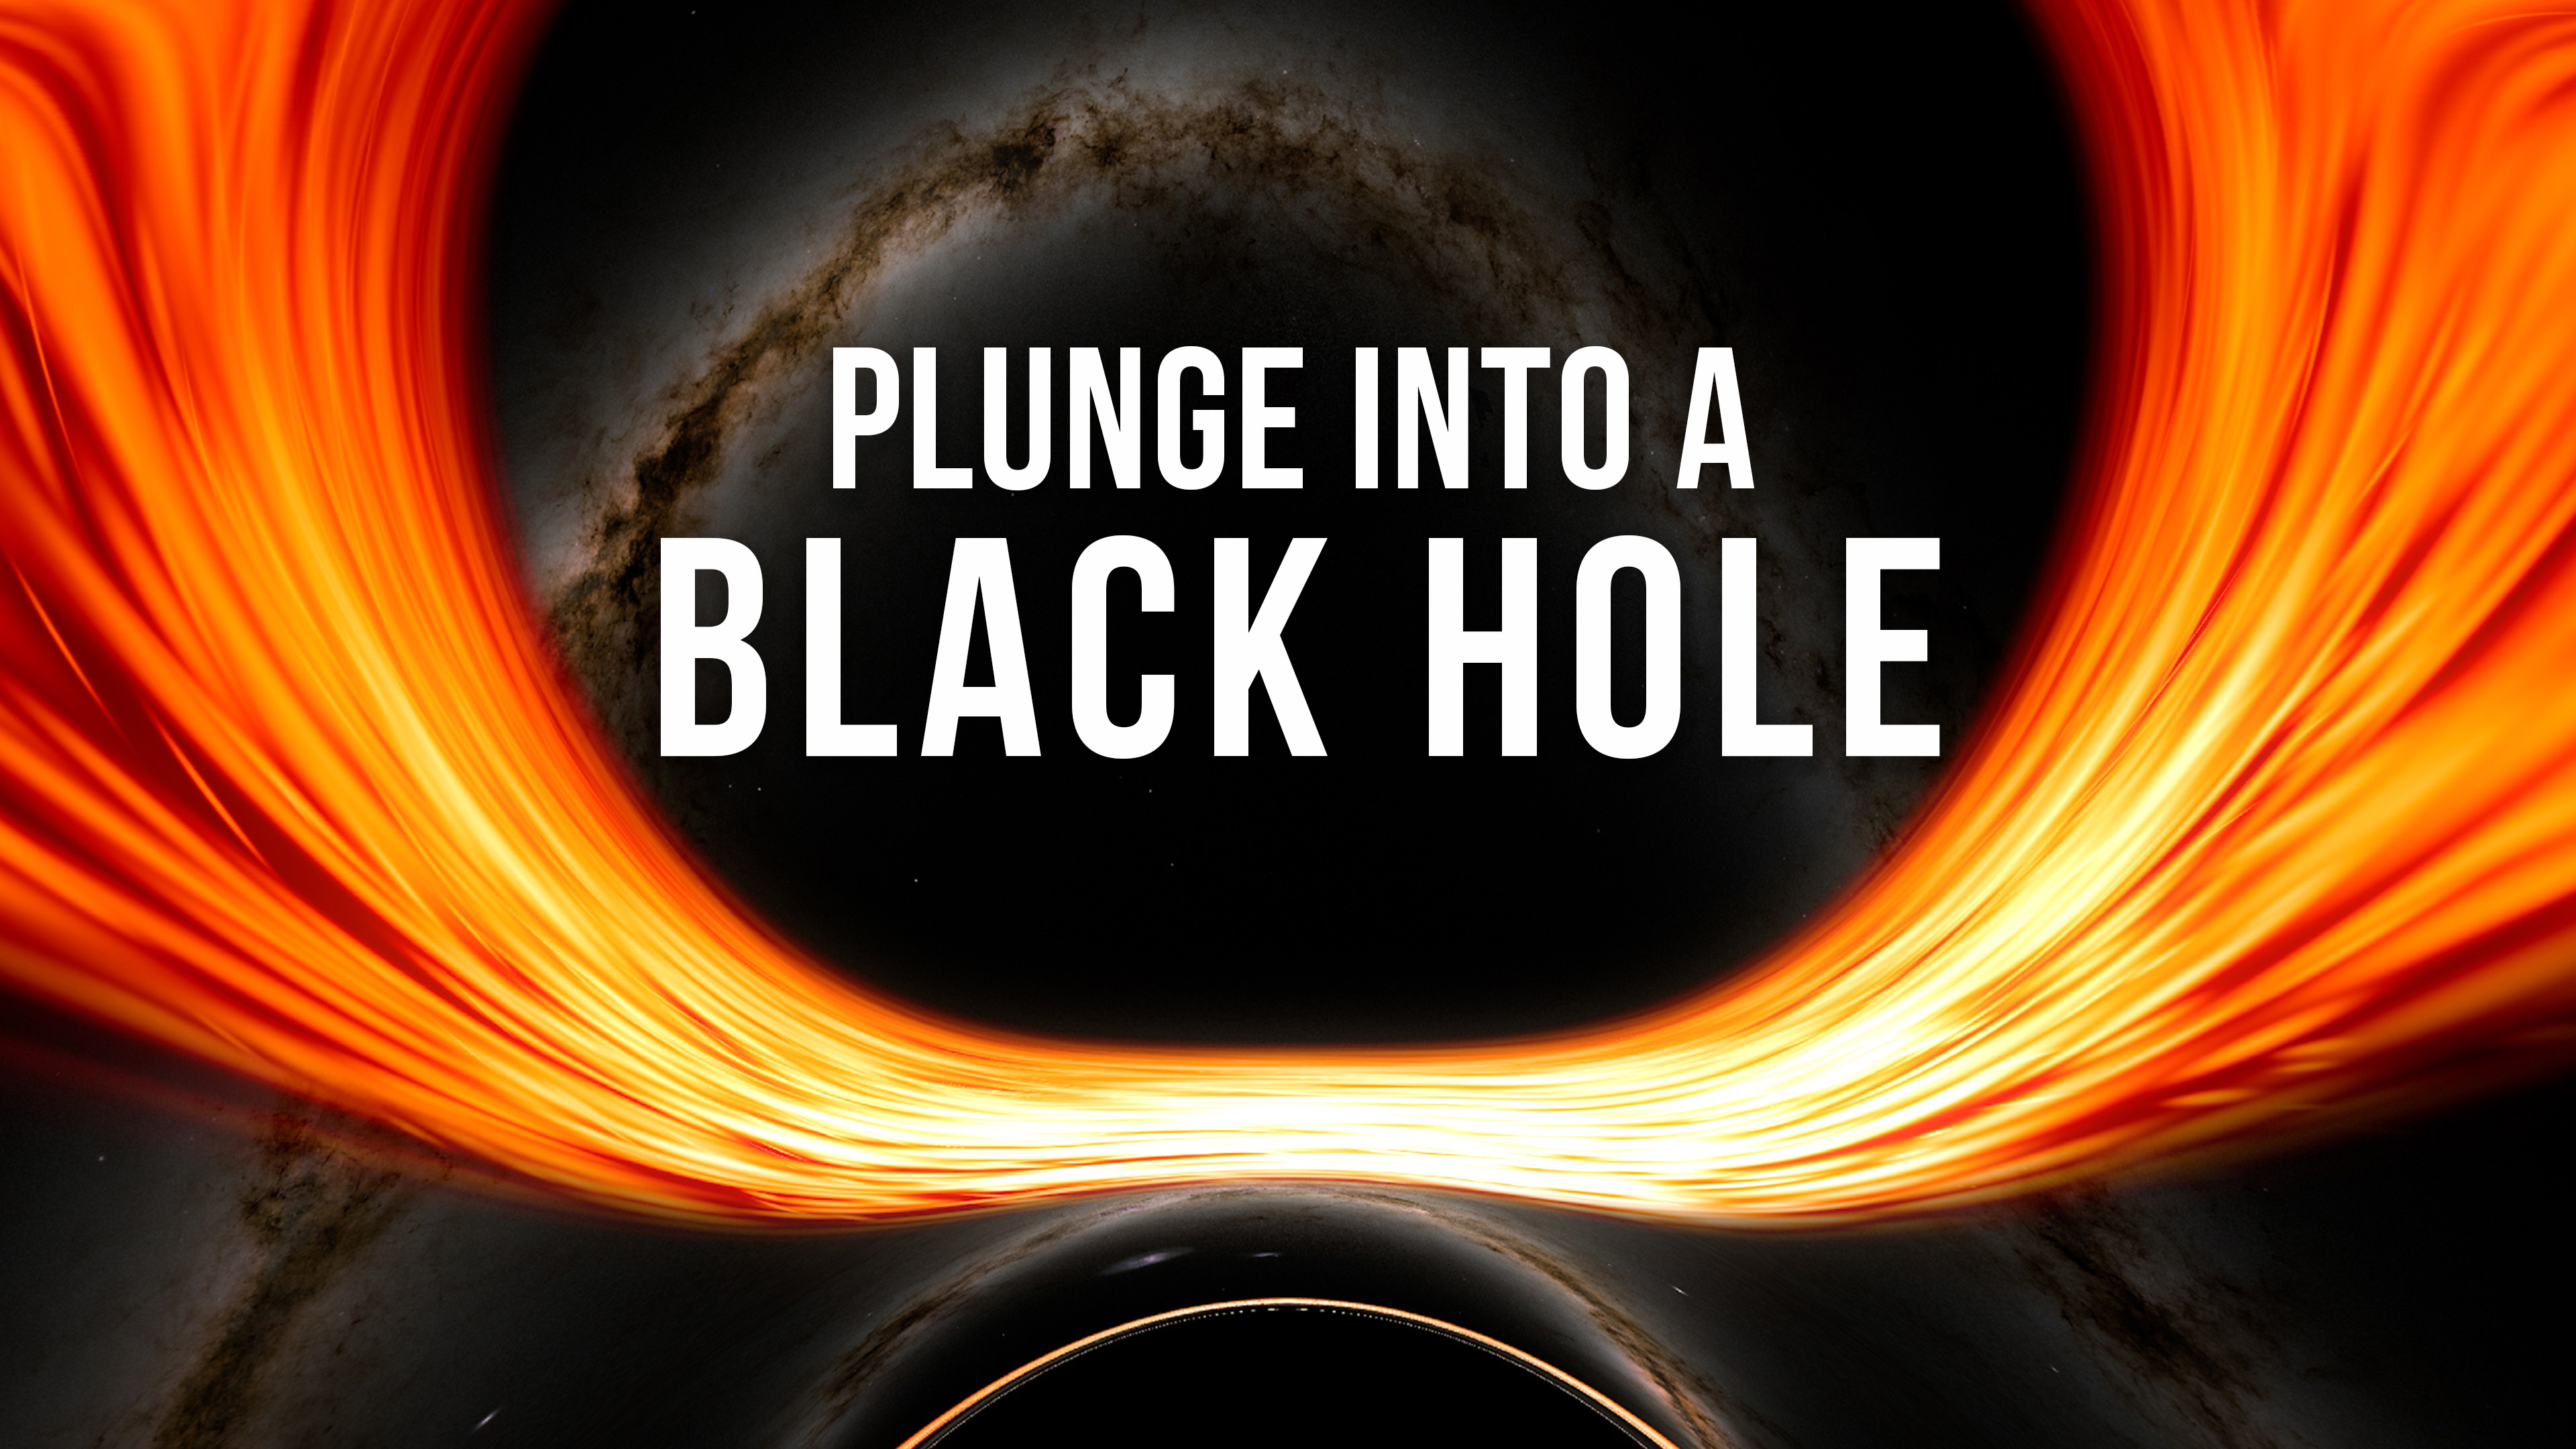 In this flight toward a supermassive black hole, labels highlight many of the fascinating features produced by the effects of general relativity along the way. This supercomputer visualization tracks a camera as it approaches, briefly orbits, and then crosses the event horizon — the point of no return — of a supersized black hole similar in mass to the one at the center of our galaxy.  Credit: NASA's Goddard Space Flight Center/J. Schnittman and B. PowellMusic: “Tidal Force,” Thomas Daniel Bellingham [PRS], Universal Production Music“Memories” from Digital Juice“Path Finder,” Eric Jacobsen [TONO] and Lorenzo Castellarin [BMI], Universal Production MusicWatch this video on the NASA Goddard YouTube channel.Complete transcript available.